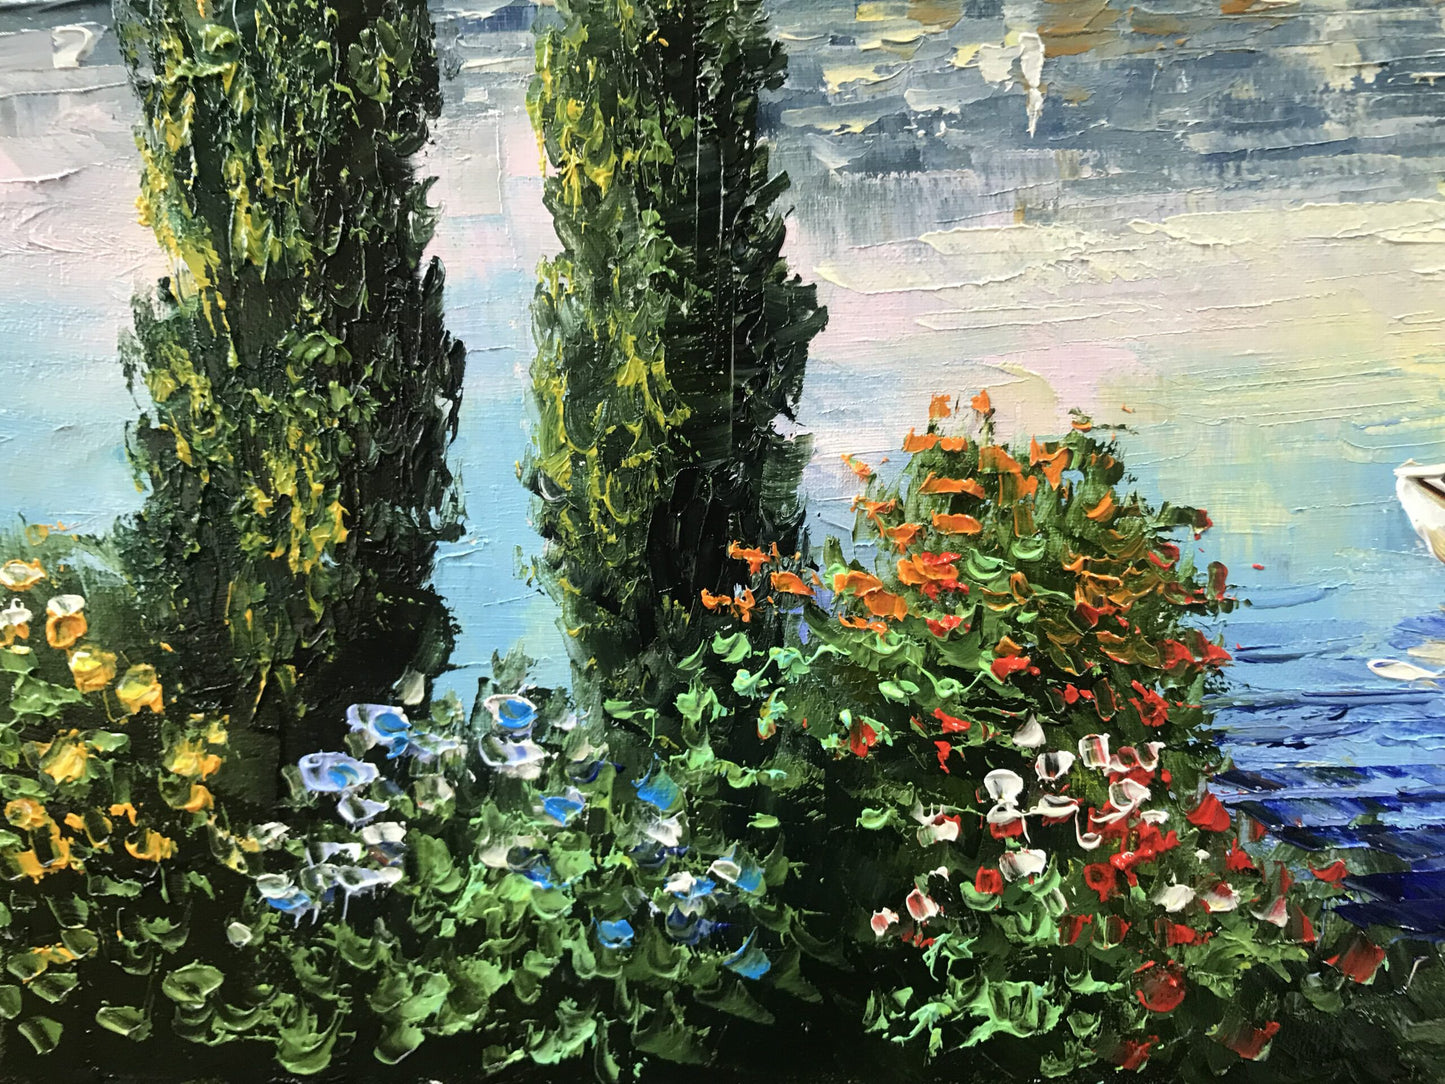 Large Painting of Lake Como Italy Landscape Oil Painting Original Bellagio Wall Art Lago Di Como Italy Paintings for Sale